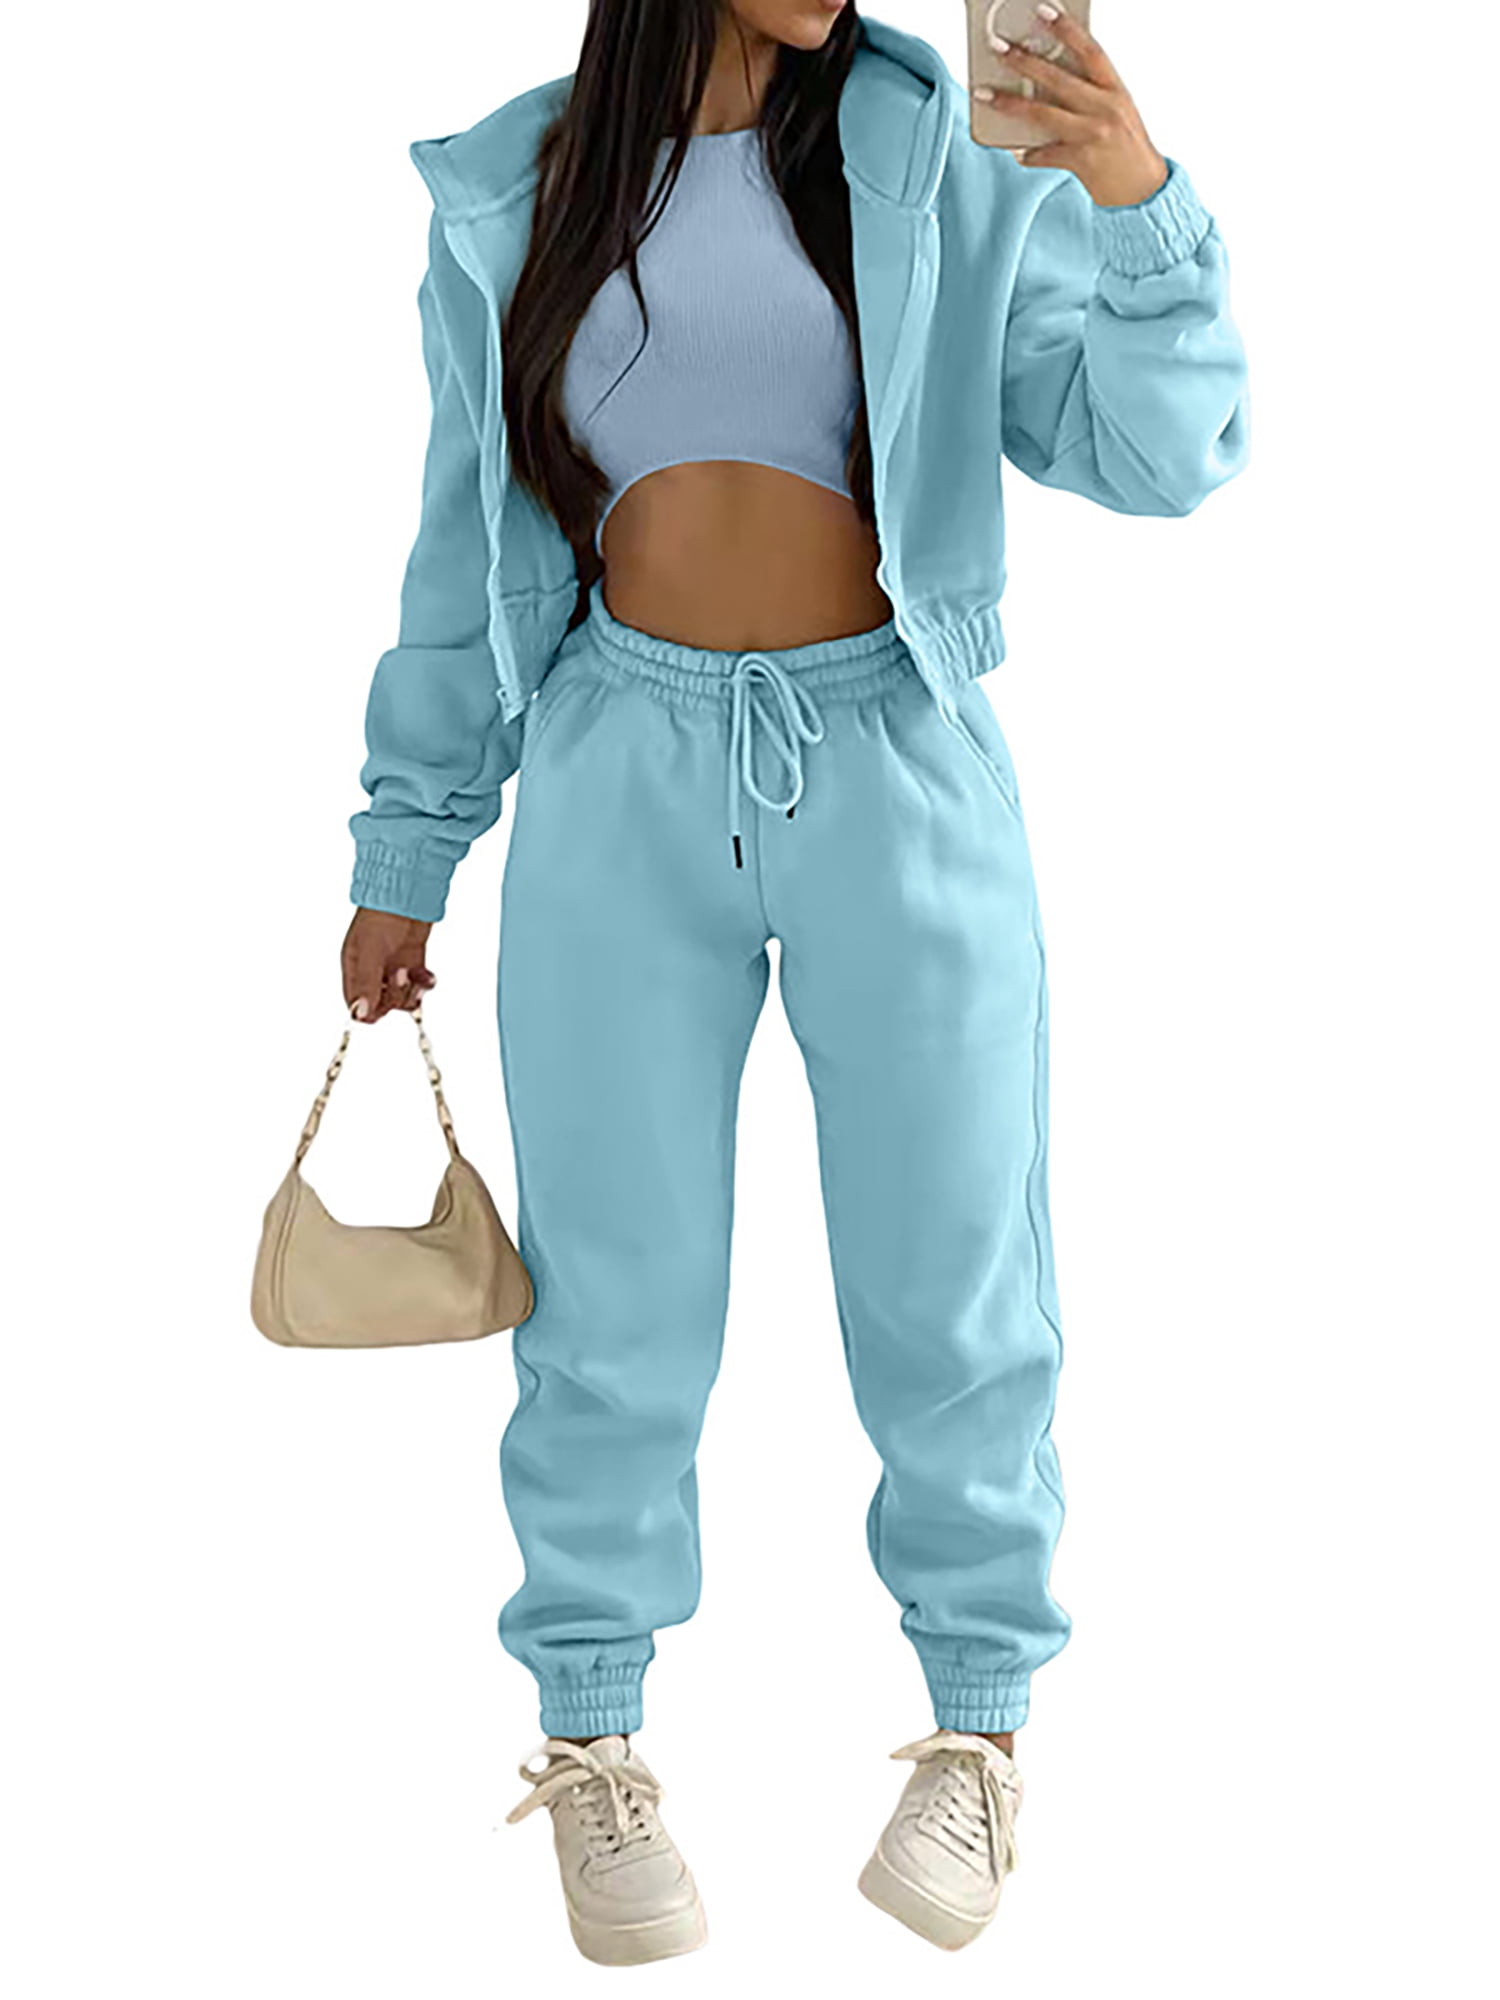 Skims Velour Womens 3 Piece Track Suit Set Hoodie, Joggers, Tank Top Large